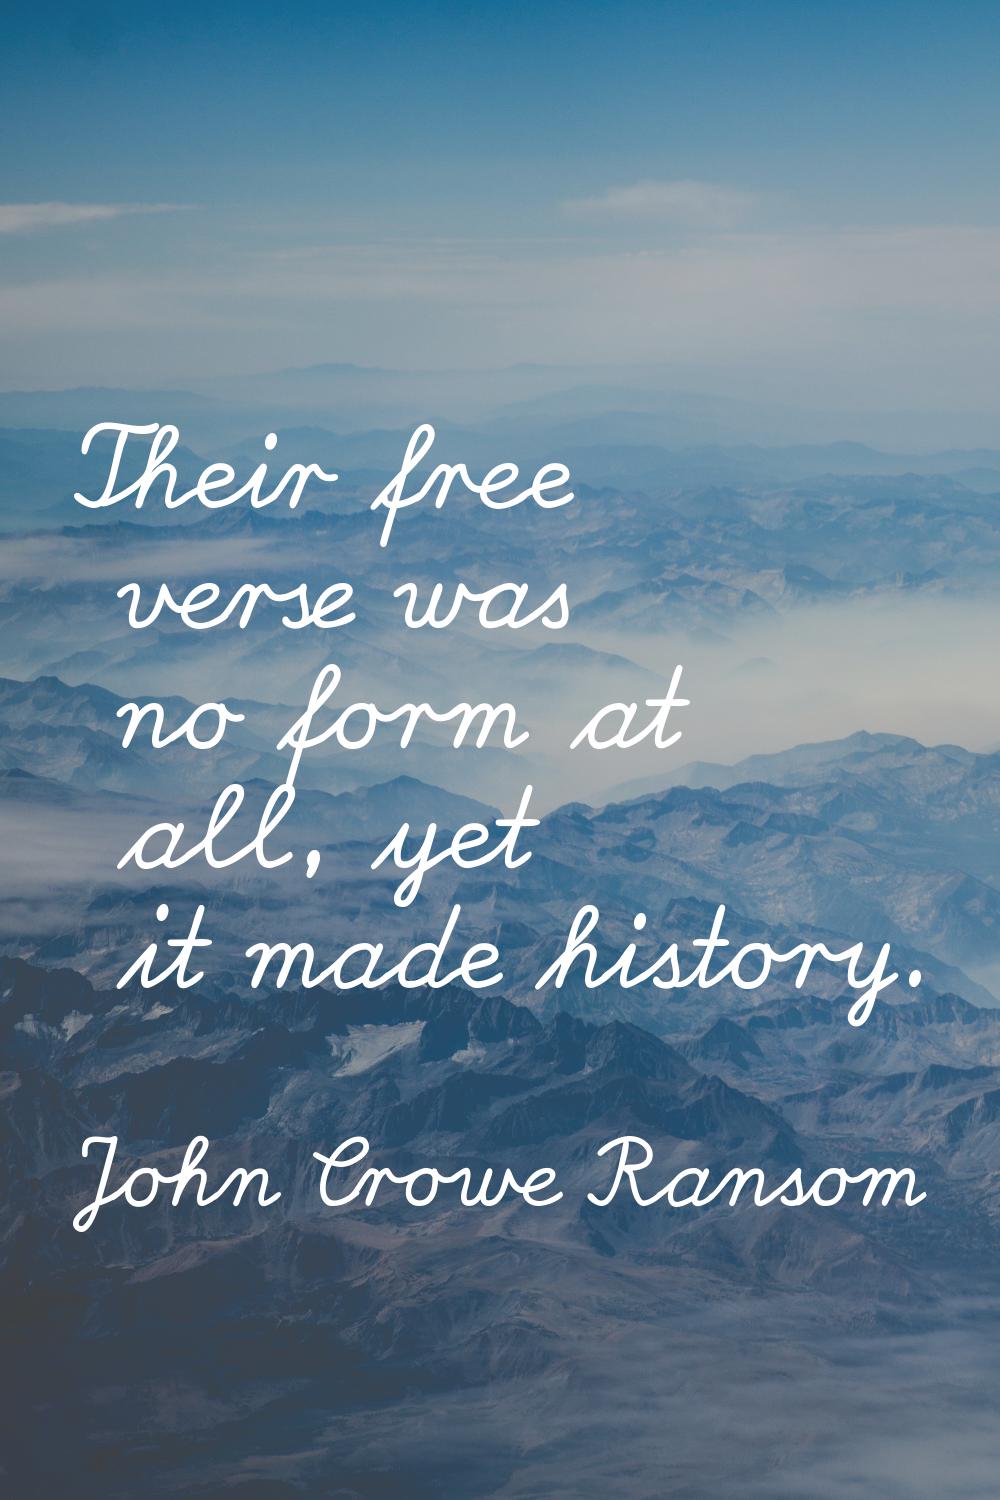 Their free verse was no form at all, yet it made history.